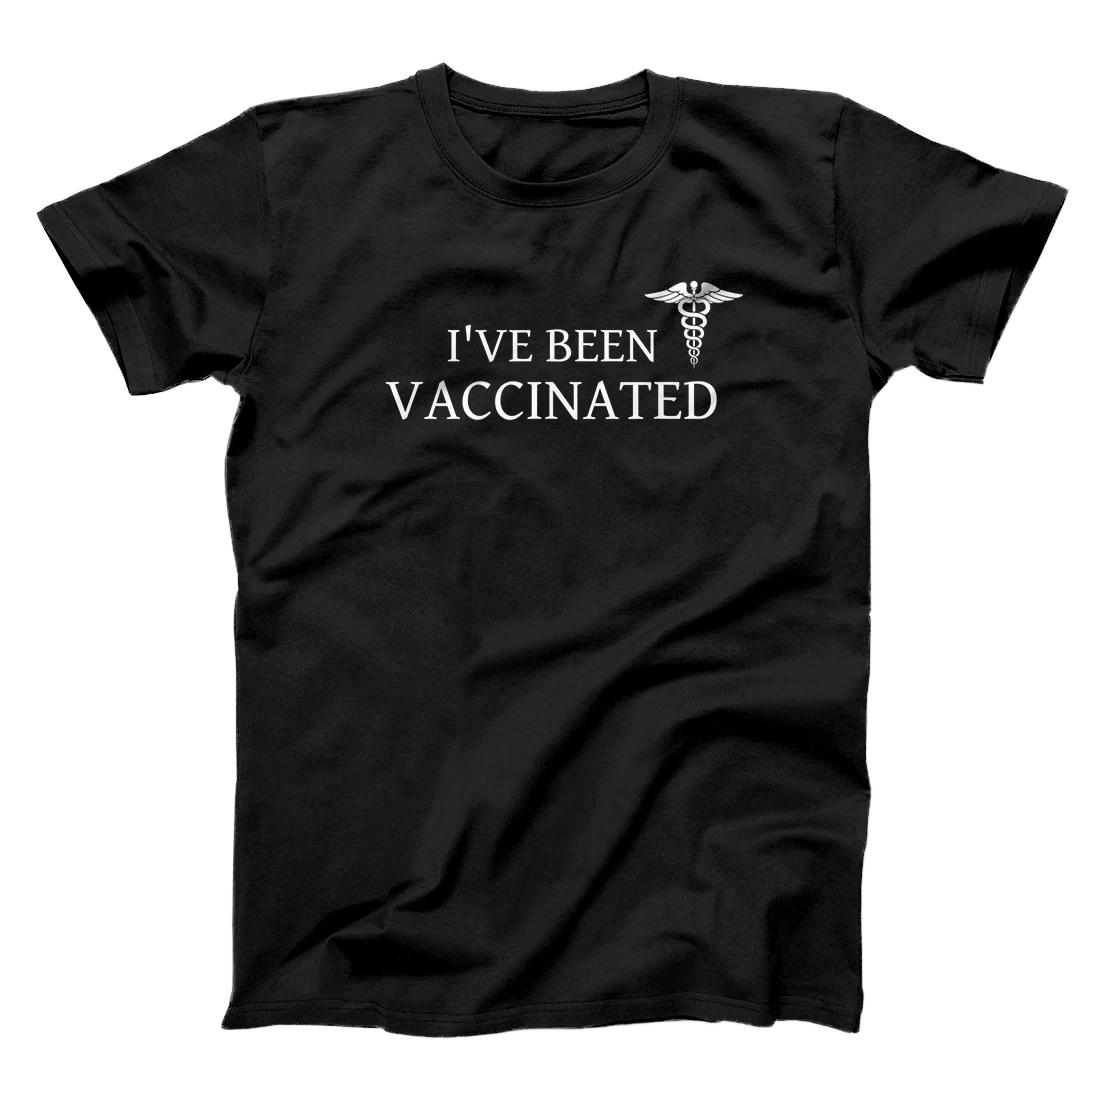 Personalized Vaccination Shirt- I've Been Vaccinated T-Shirt